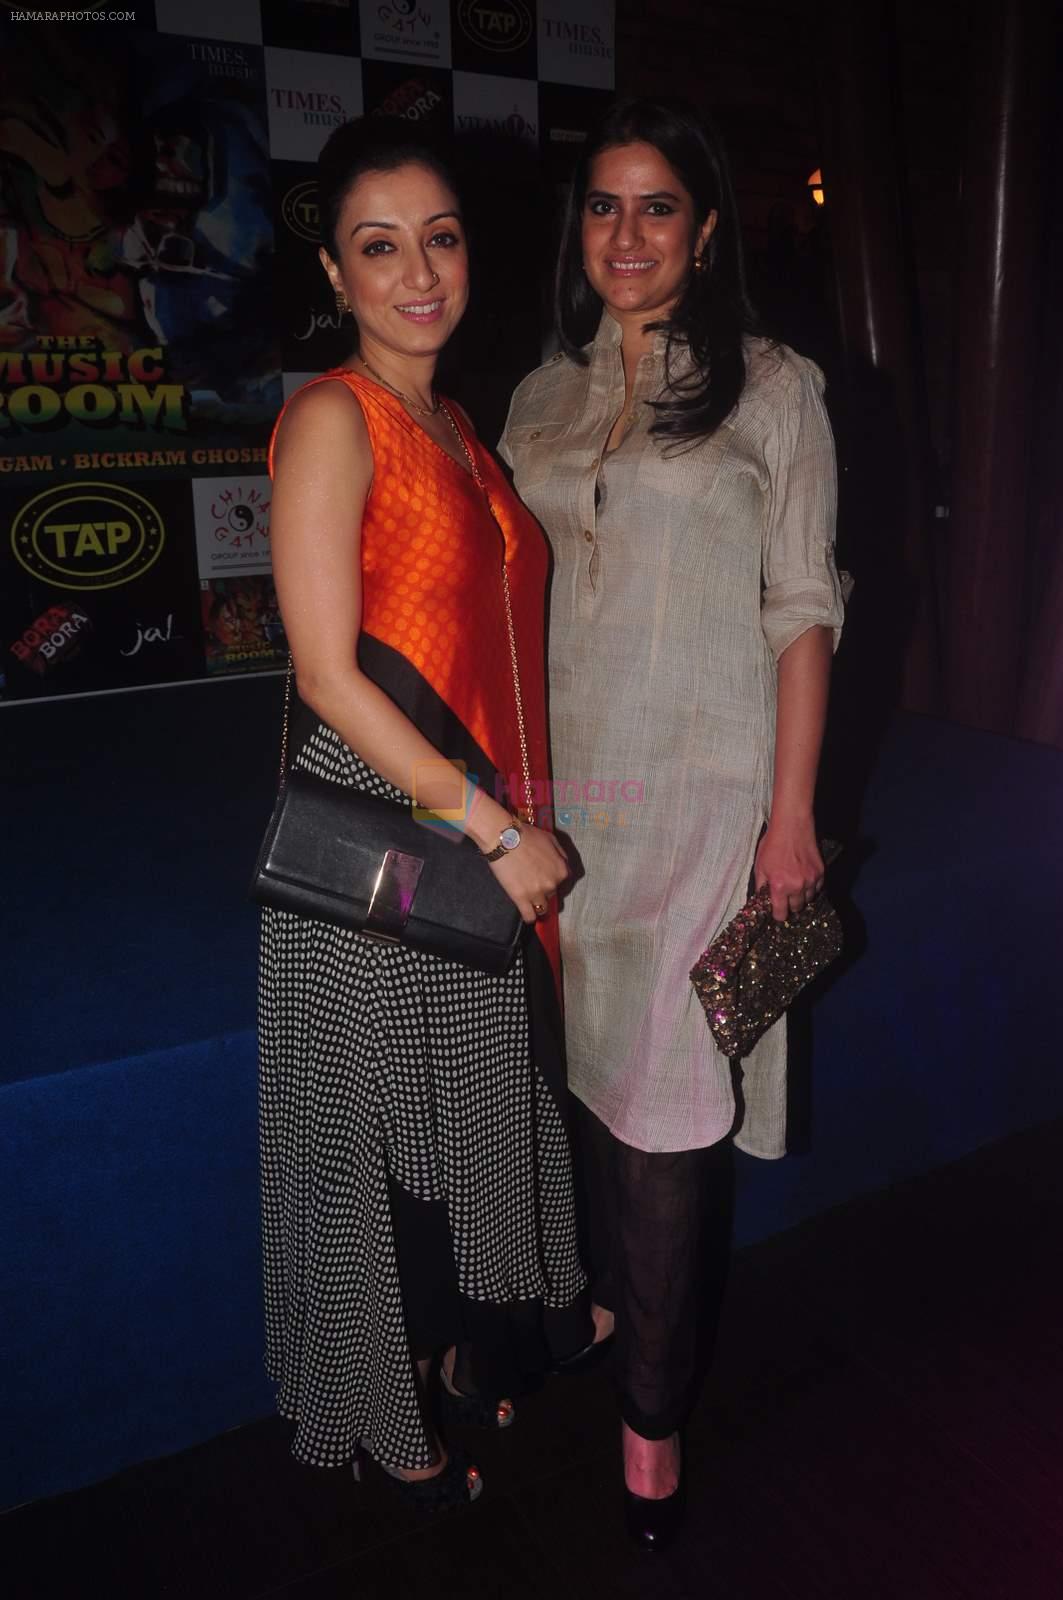 Sona Mohapatra, Madhurima Nigam at Bickram ghosh's album launch in Tap Bar on 25th Feb 2015